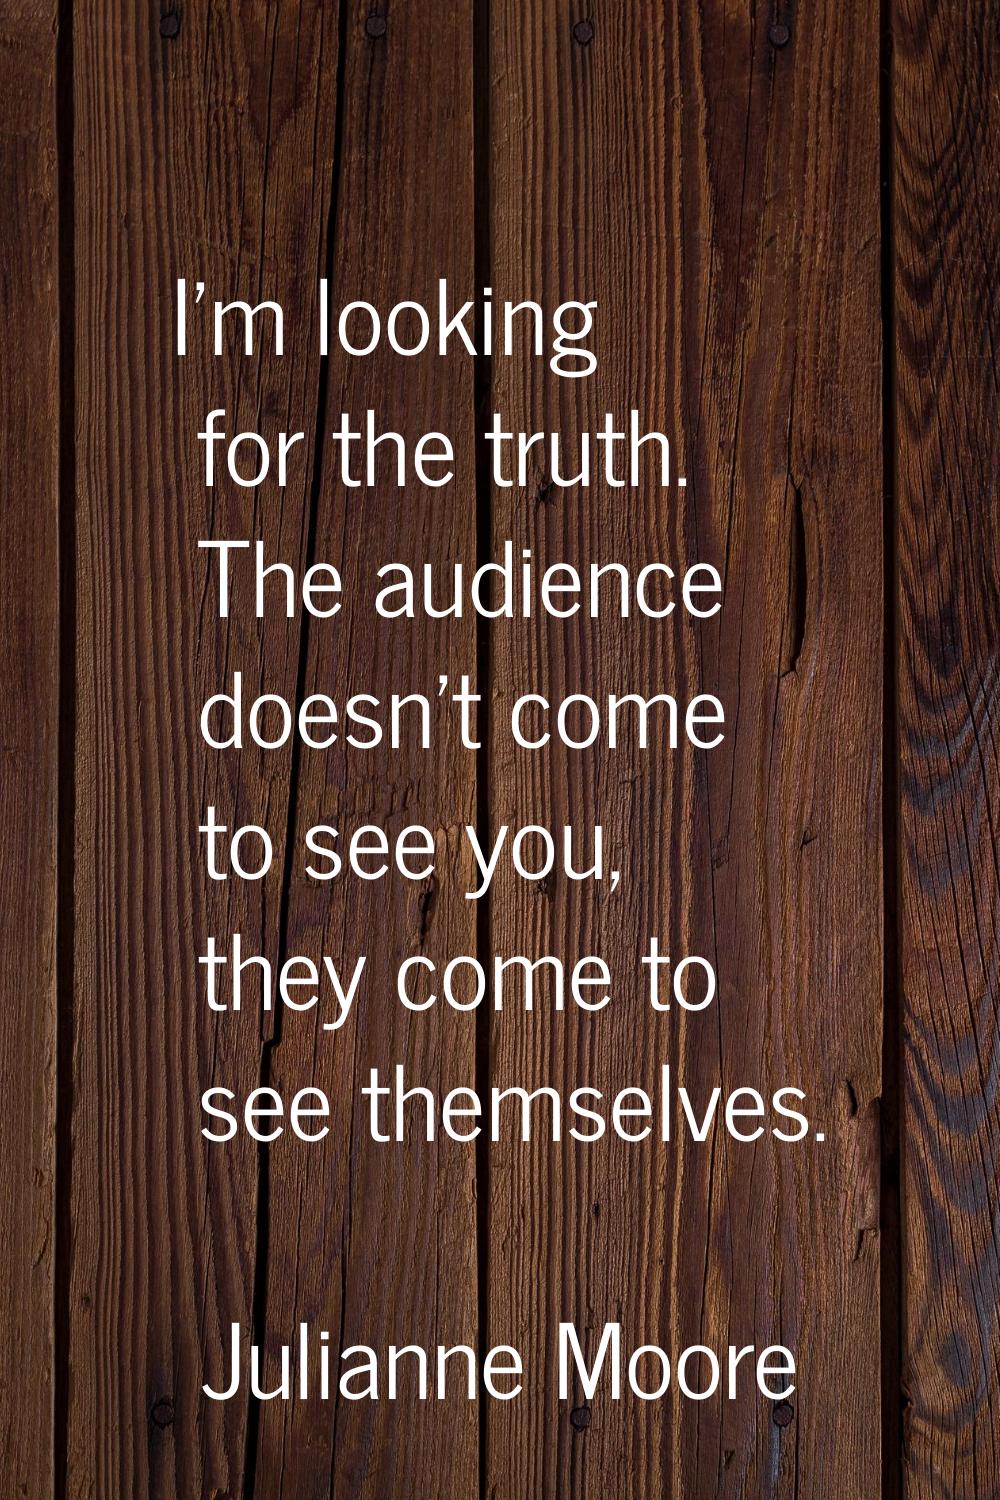 I'm looking for the truth. The audience doesn't come to see you, they come to see themselves.